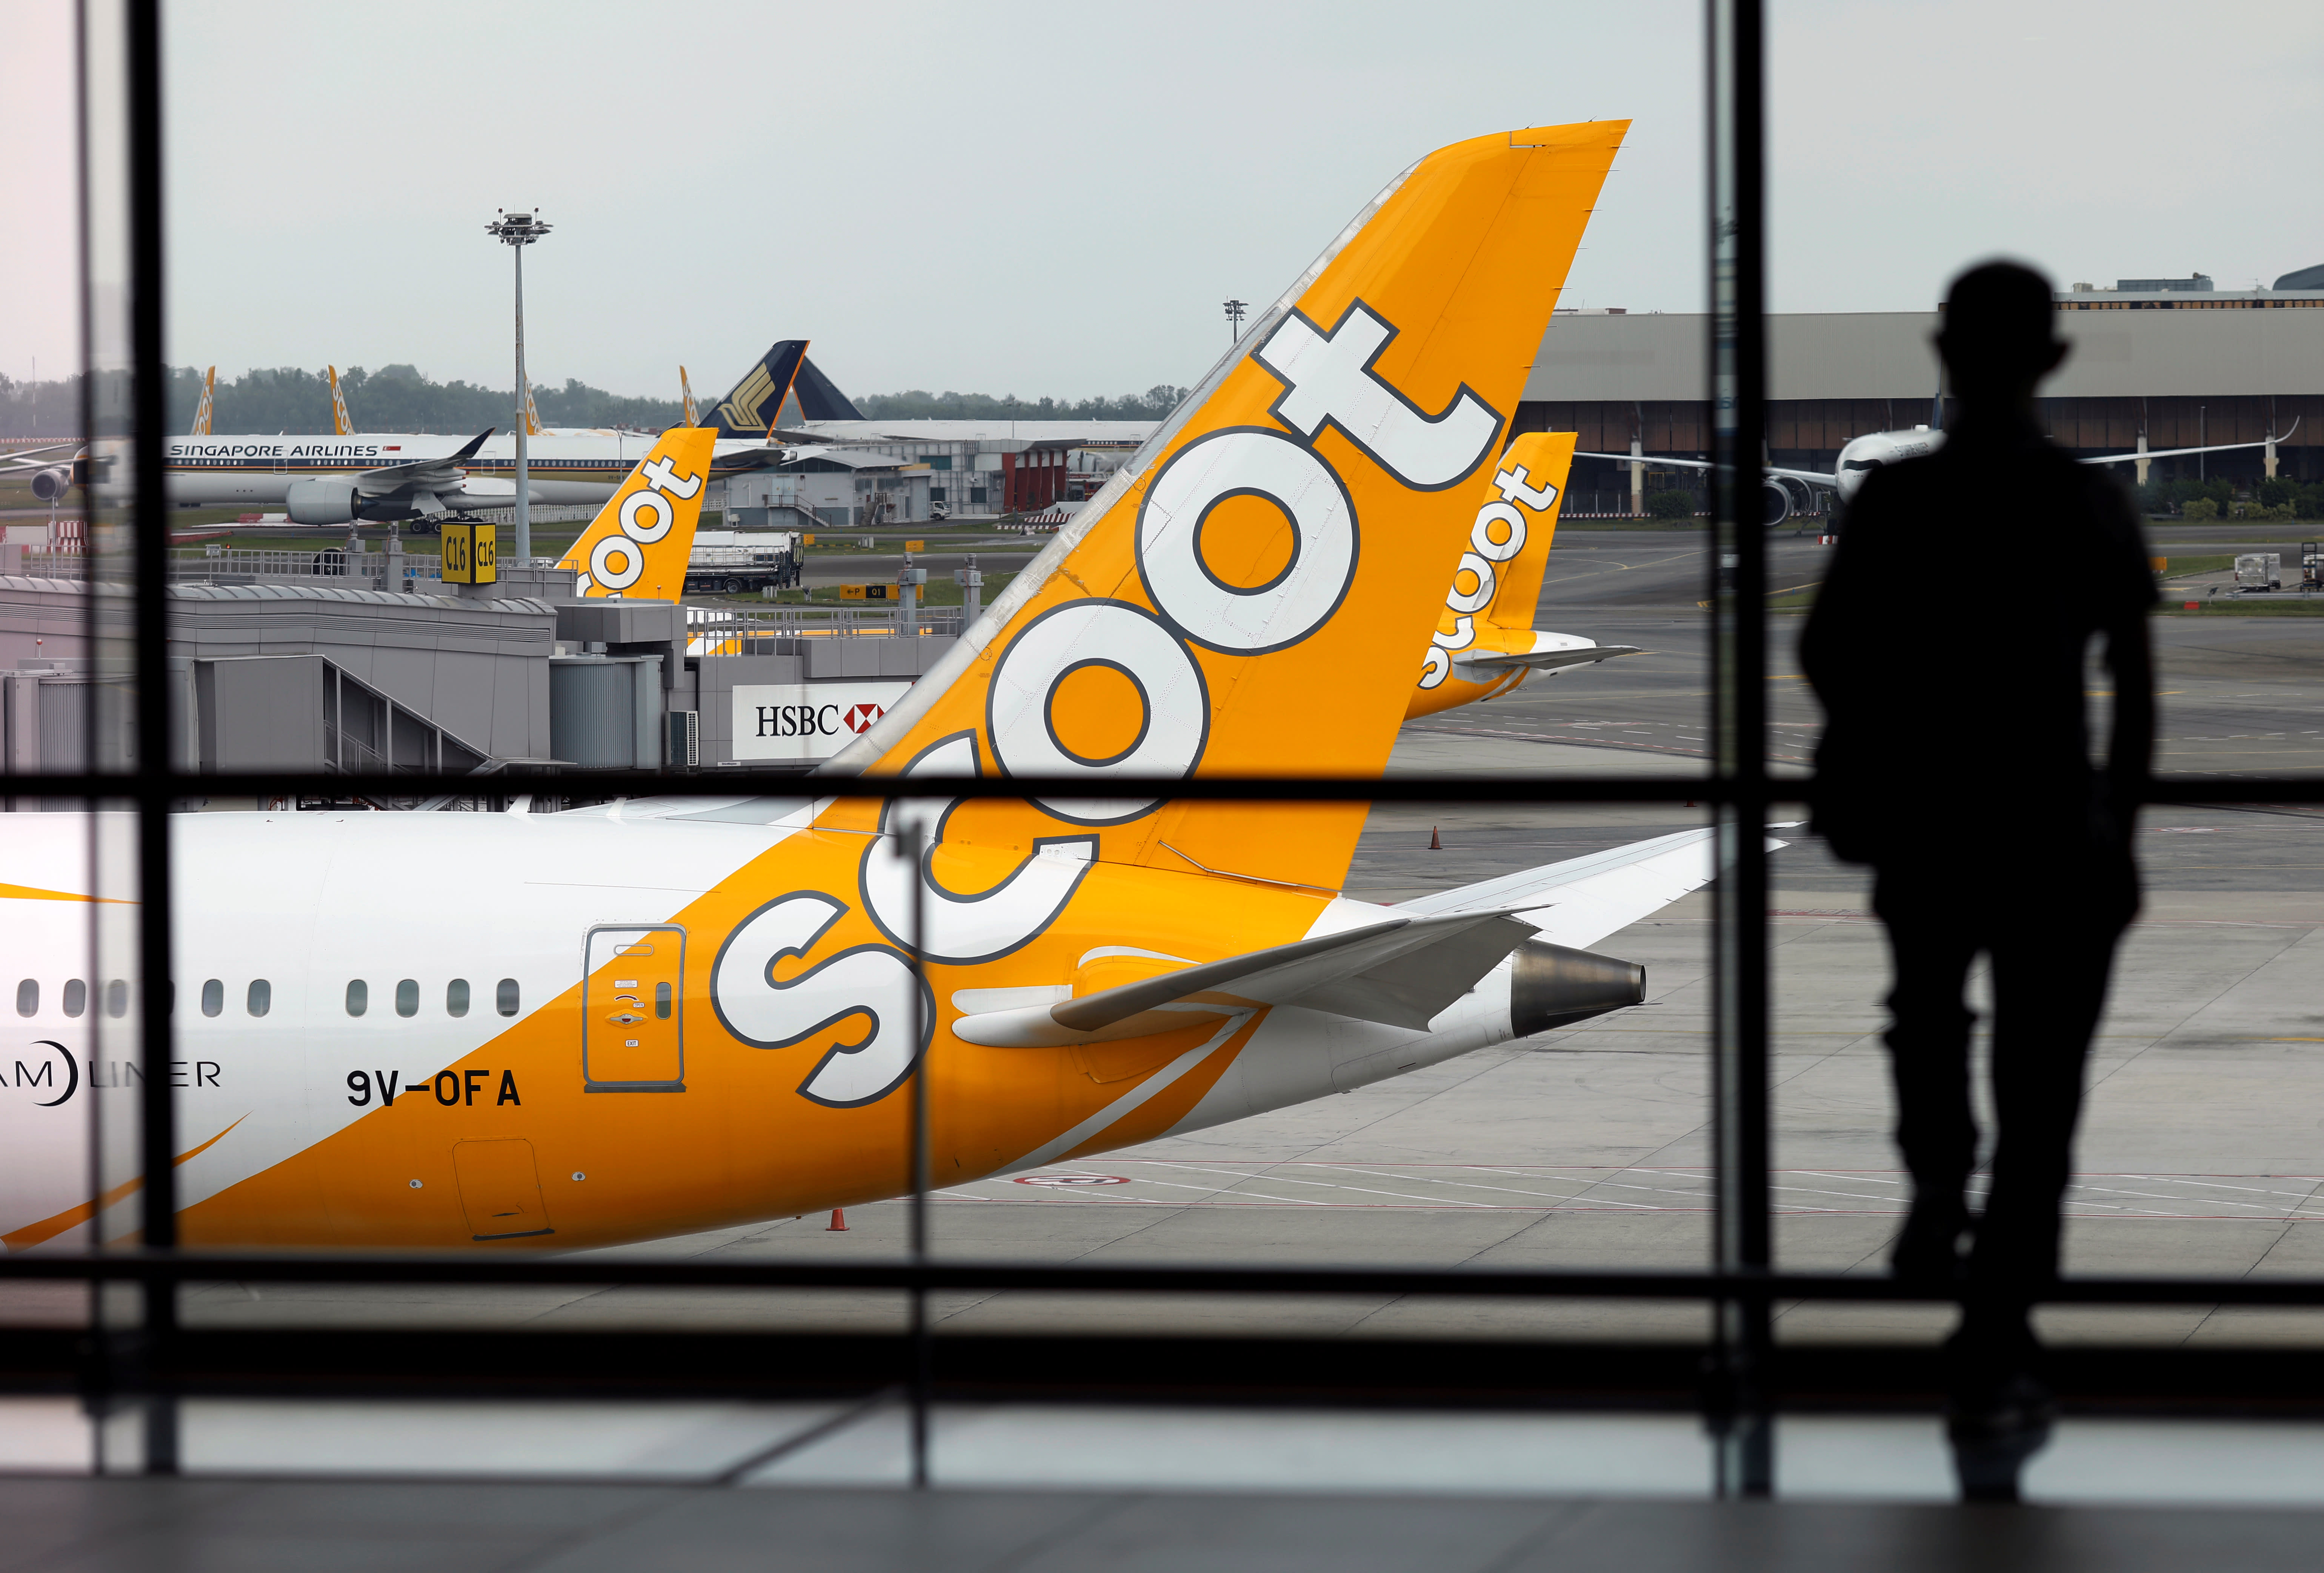 baggage allowance in scoot airlines